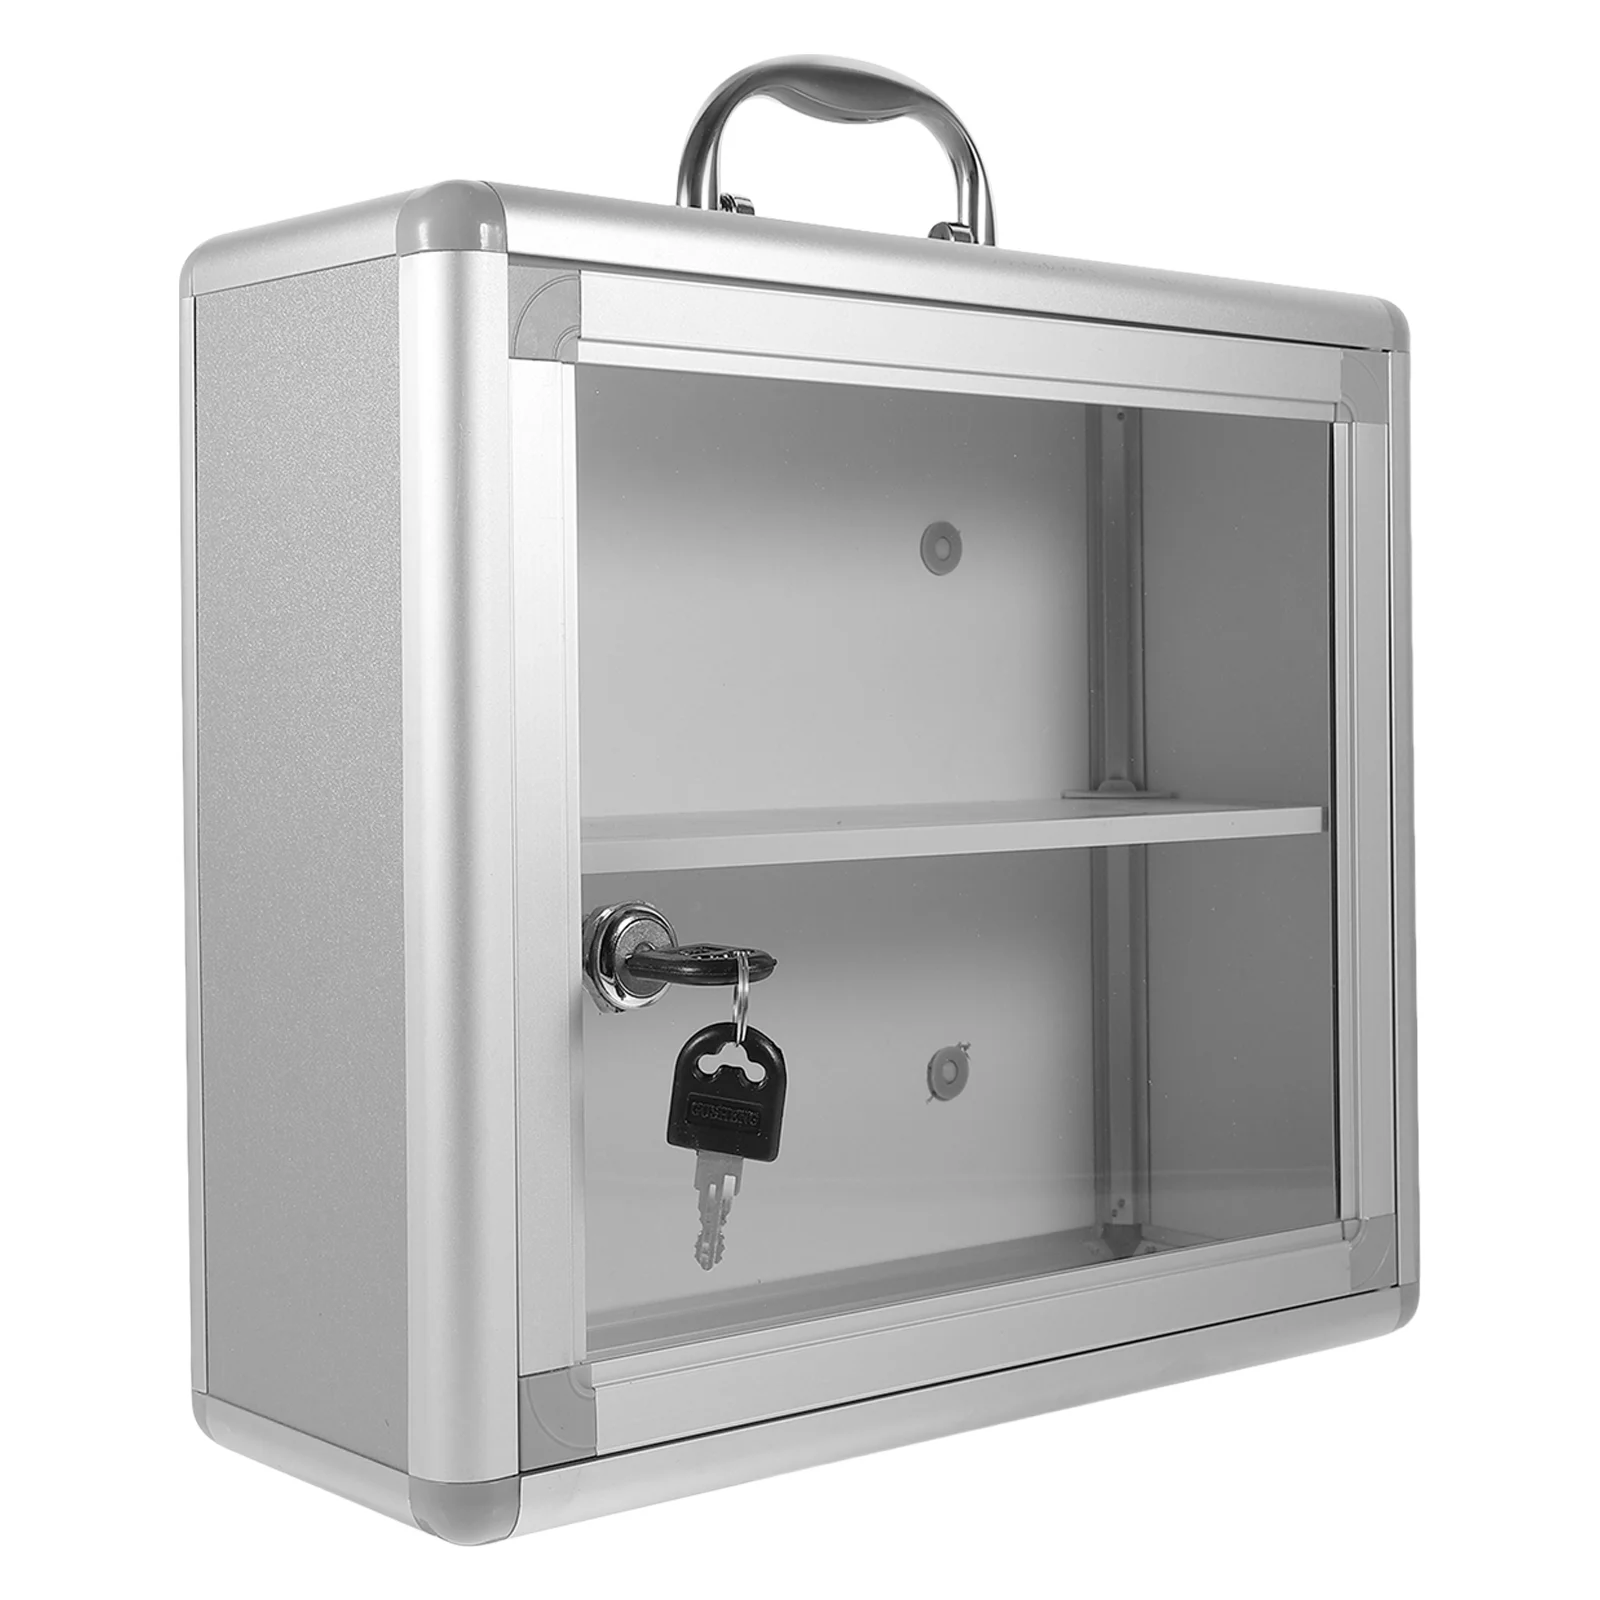 

Visible Locking Case Emergency Medicine Box Transparent Aluminum Alloy Box Wall-mounted Medicine Cabinet with Lock 30X26X11CM